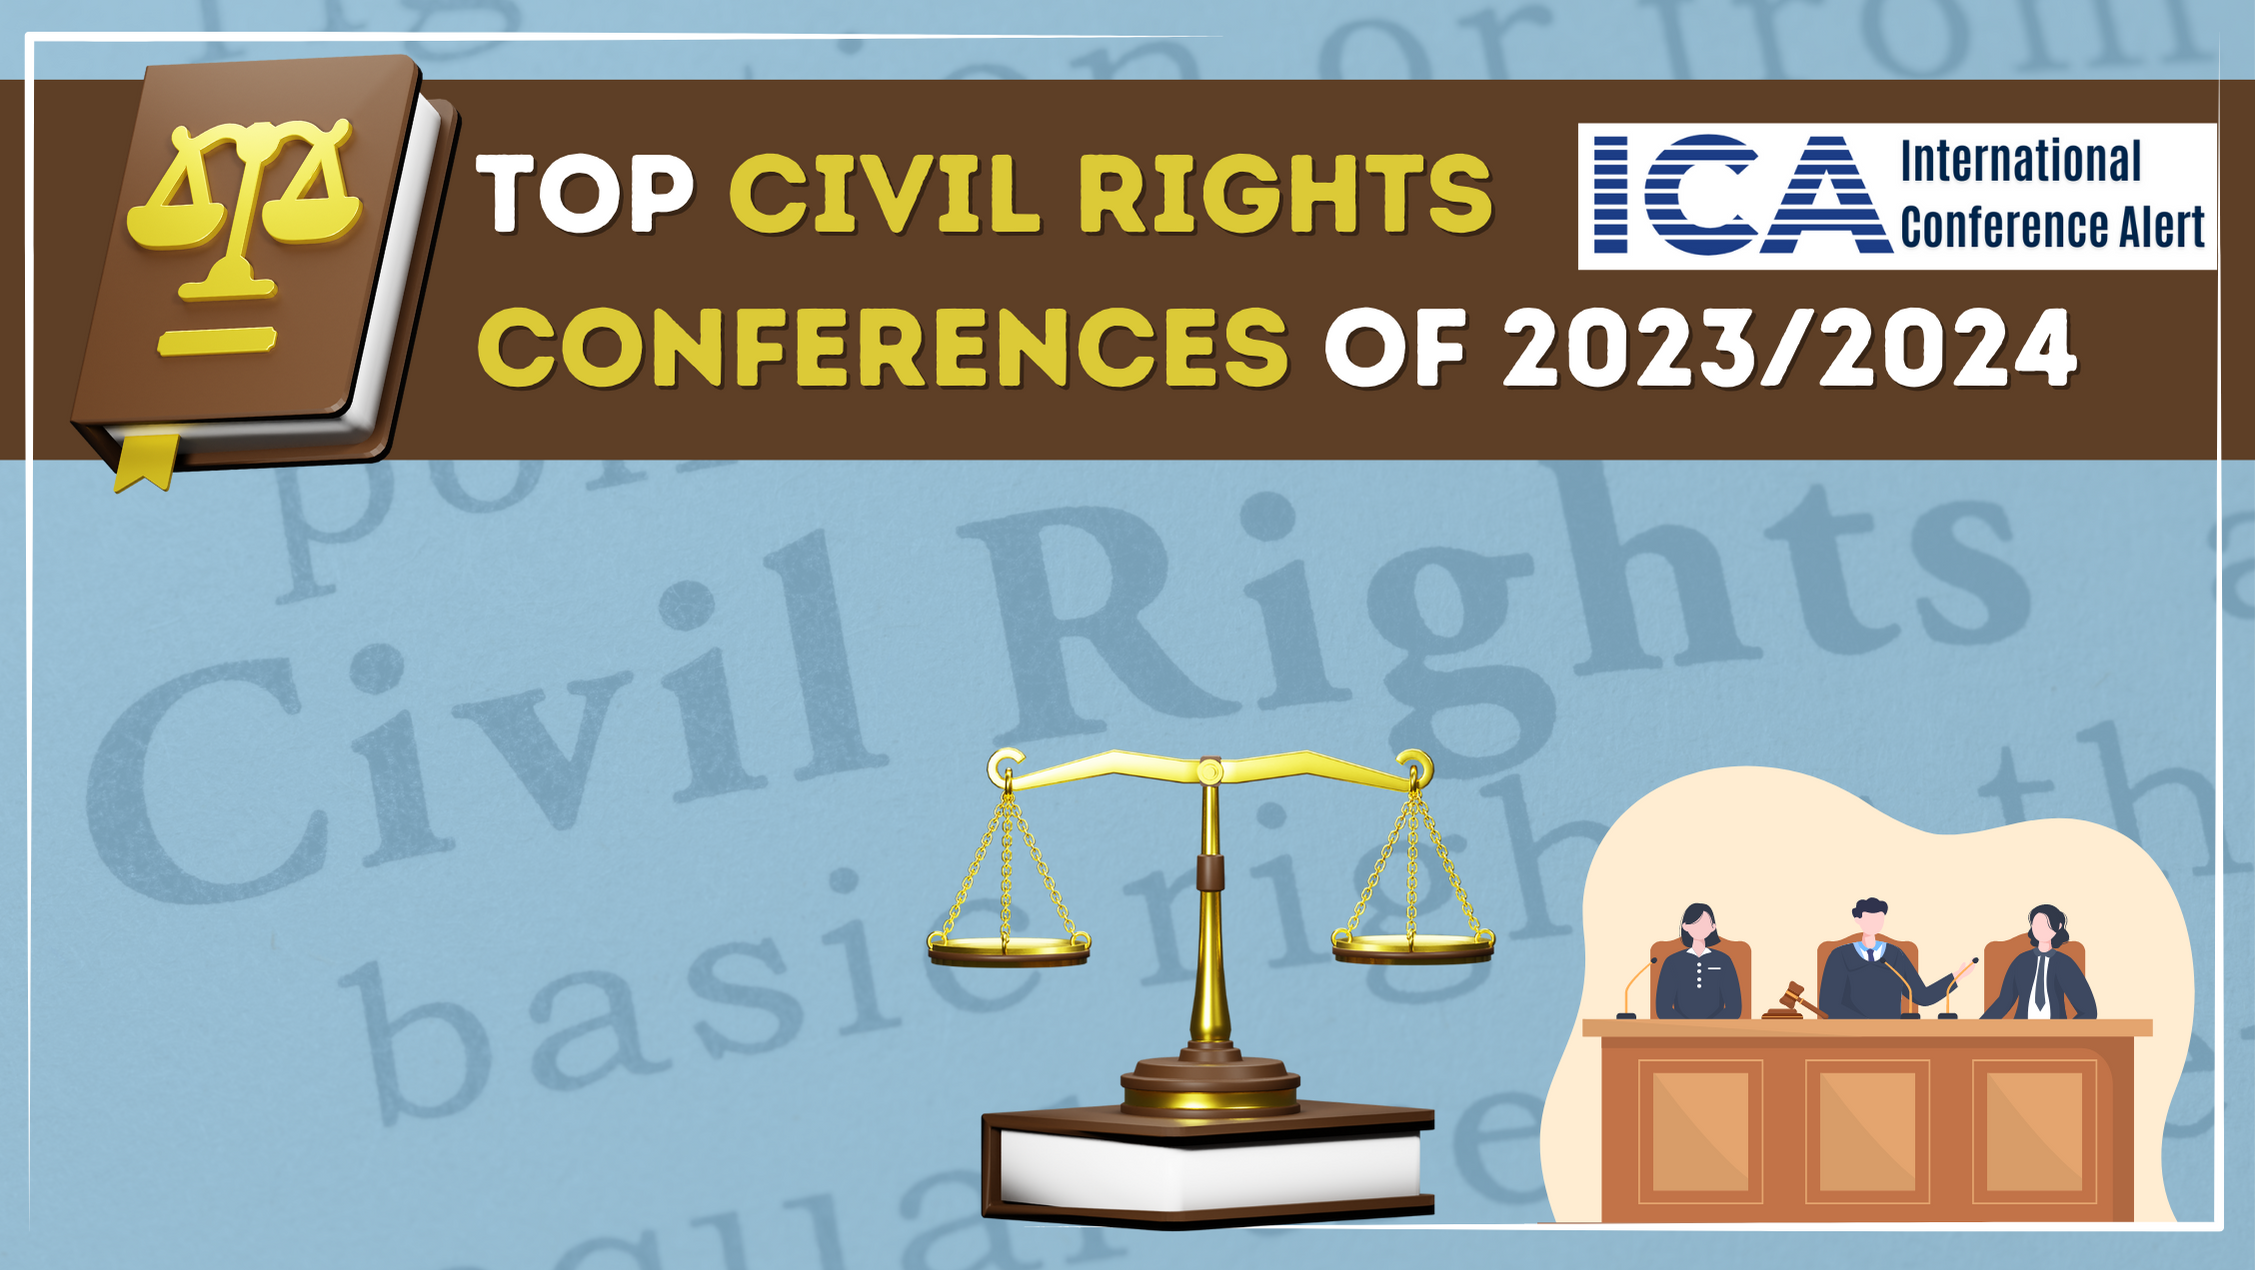 Top Civil Rights Conferences of 20232024